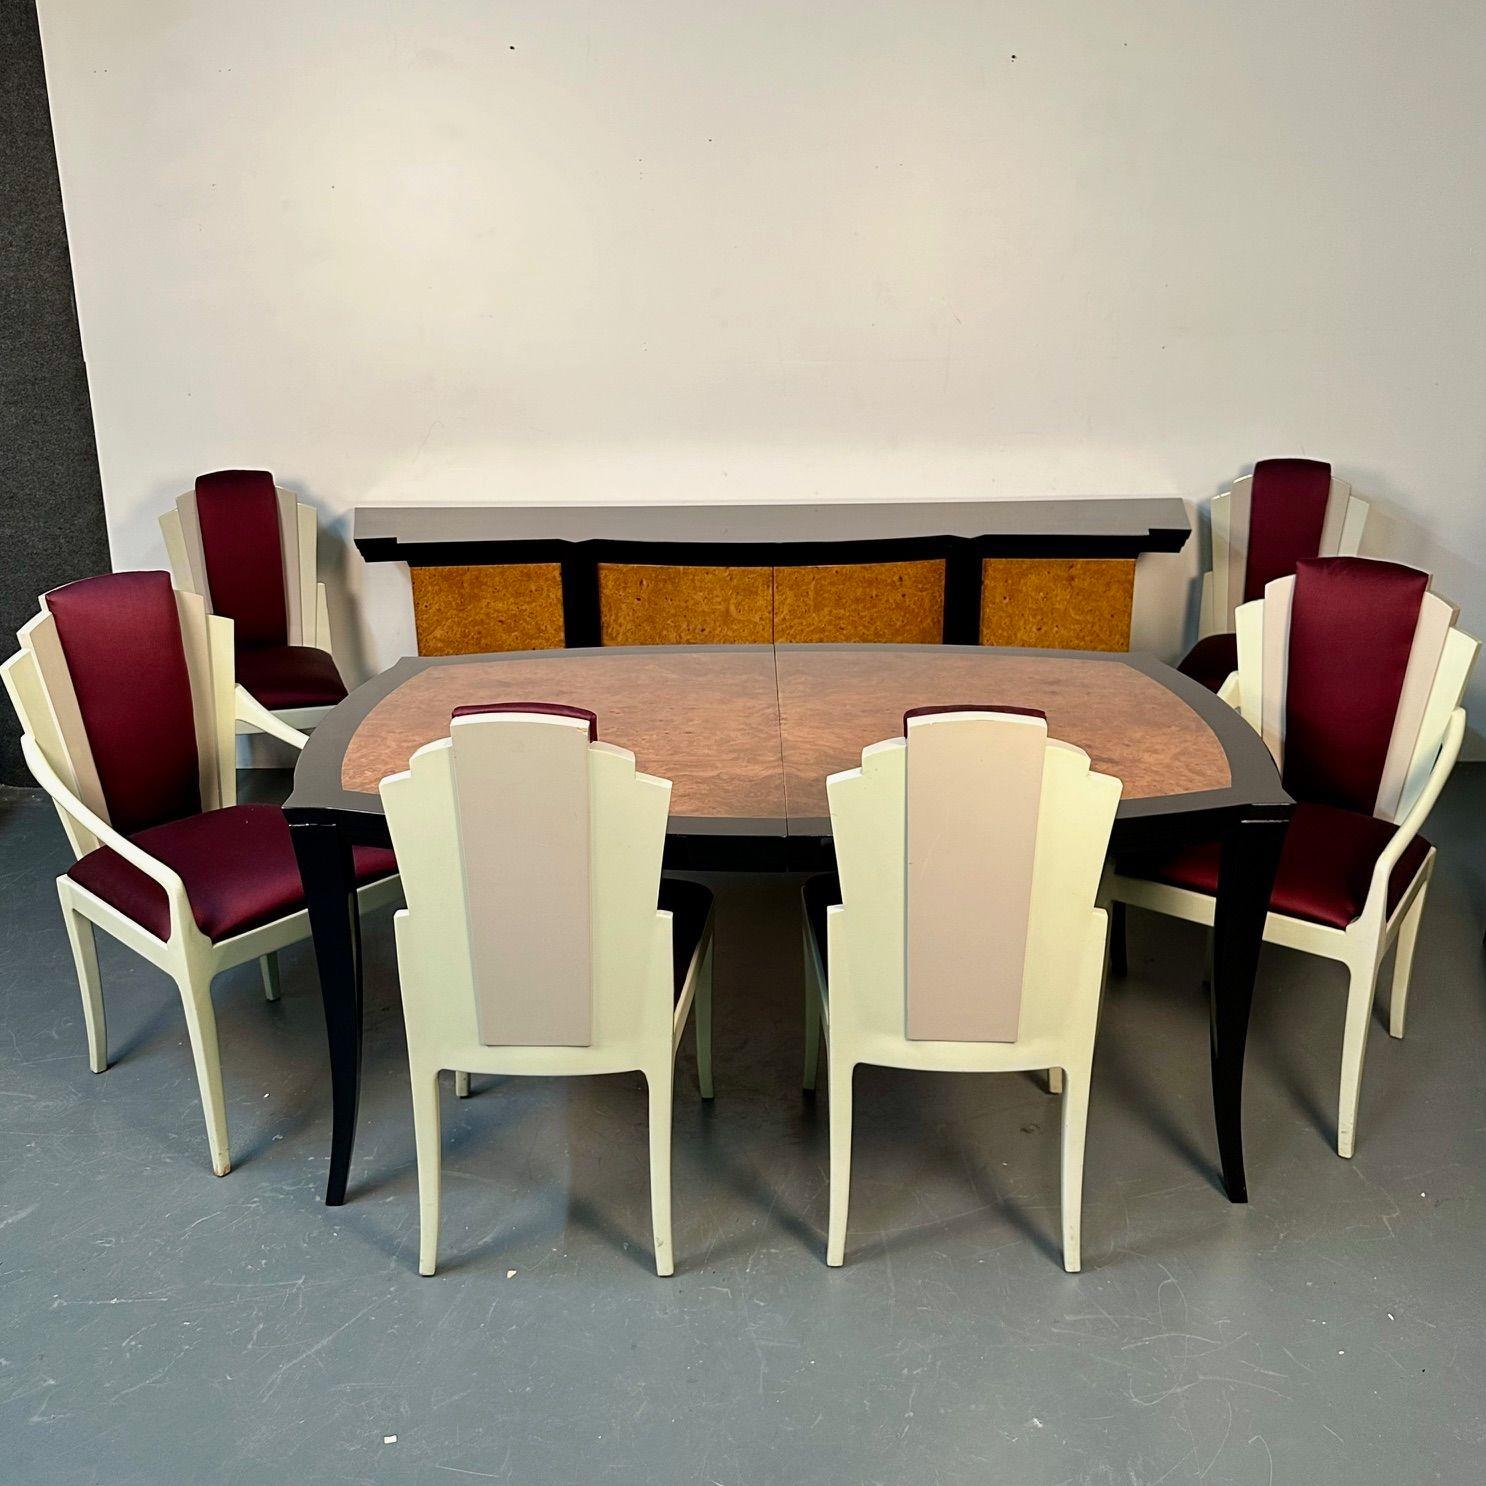 Vladimir Kagan, Mid-Century Modern, Eva Dining Room Set, Maple, Black Lacquer In Good Condition For Sale In Stamford, CT